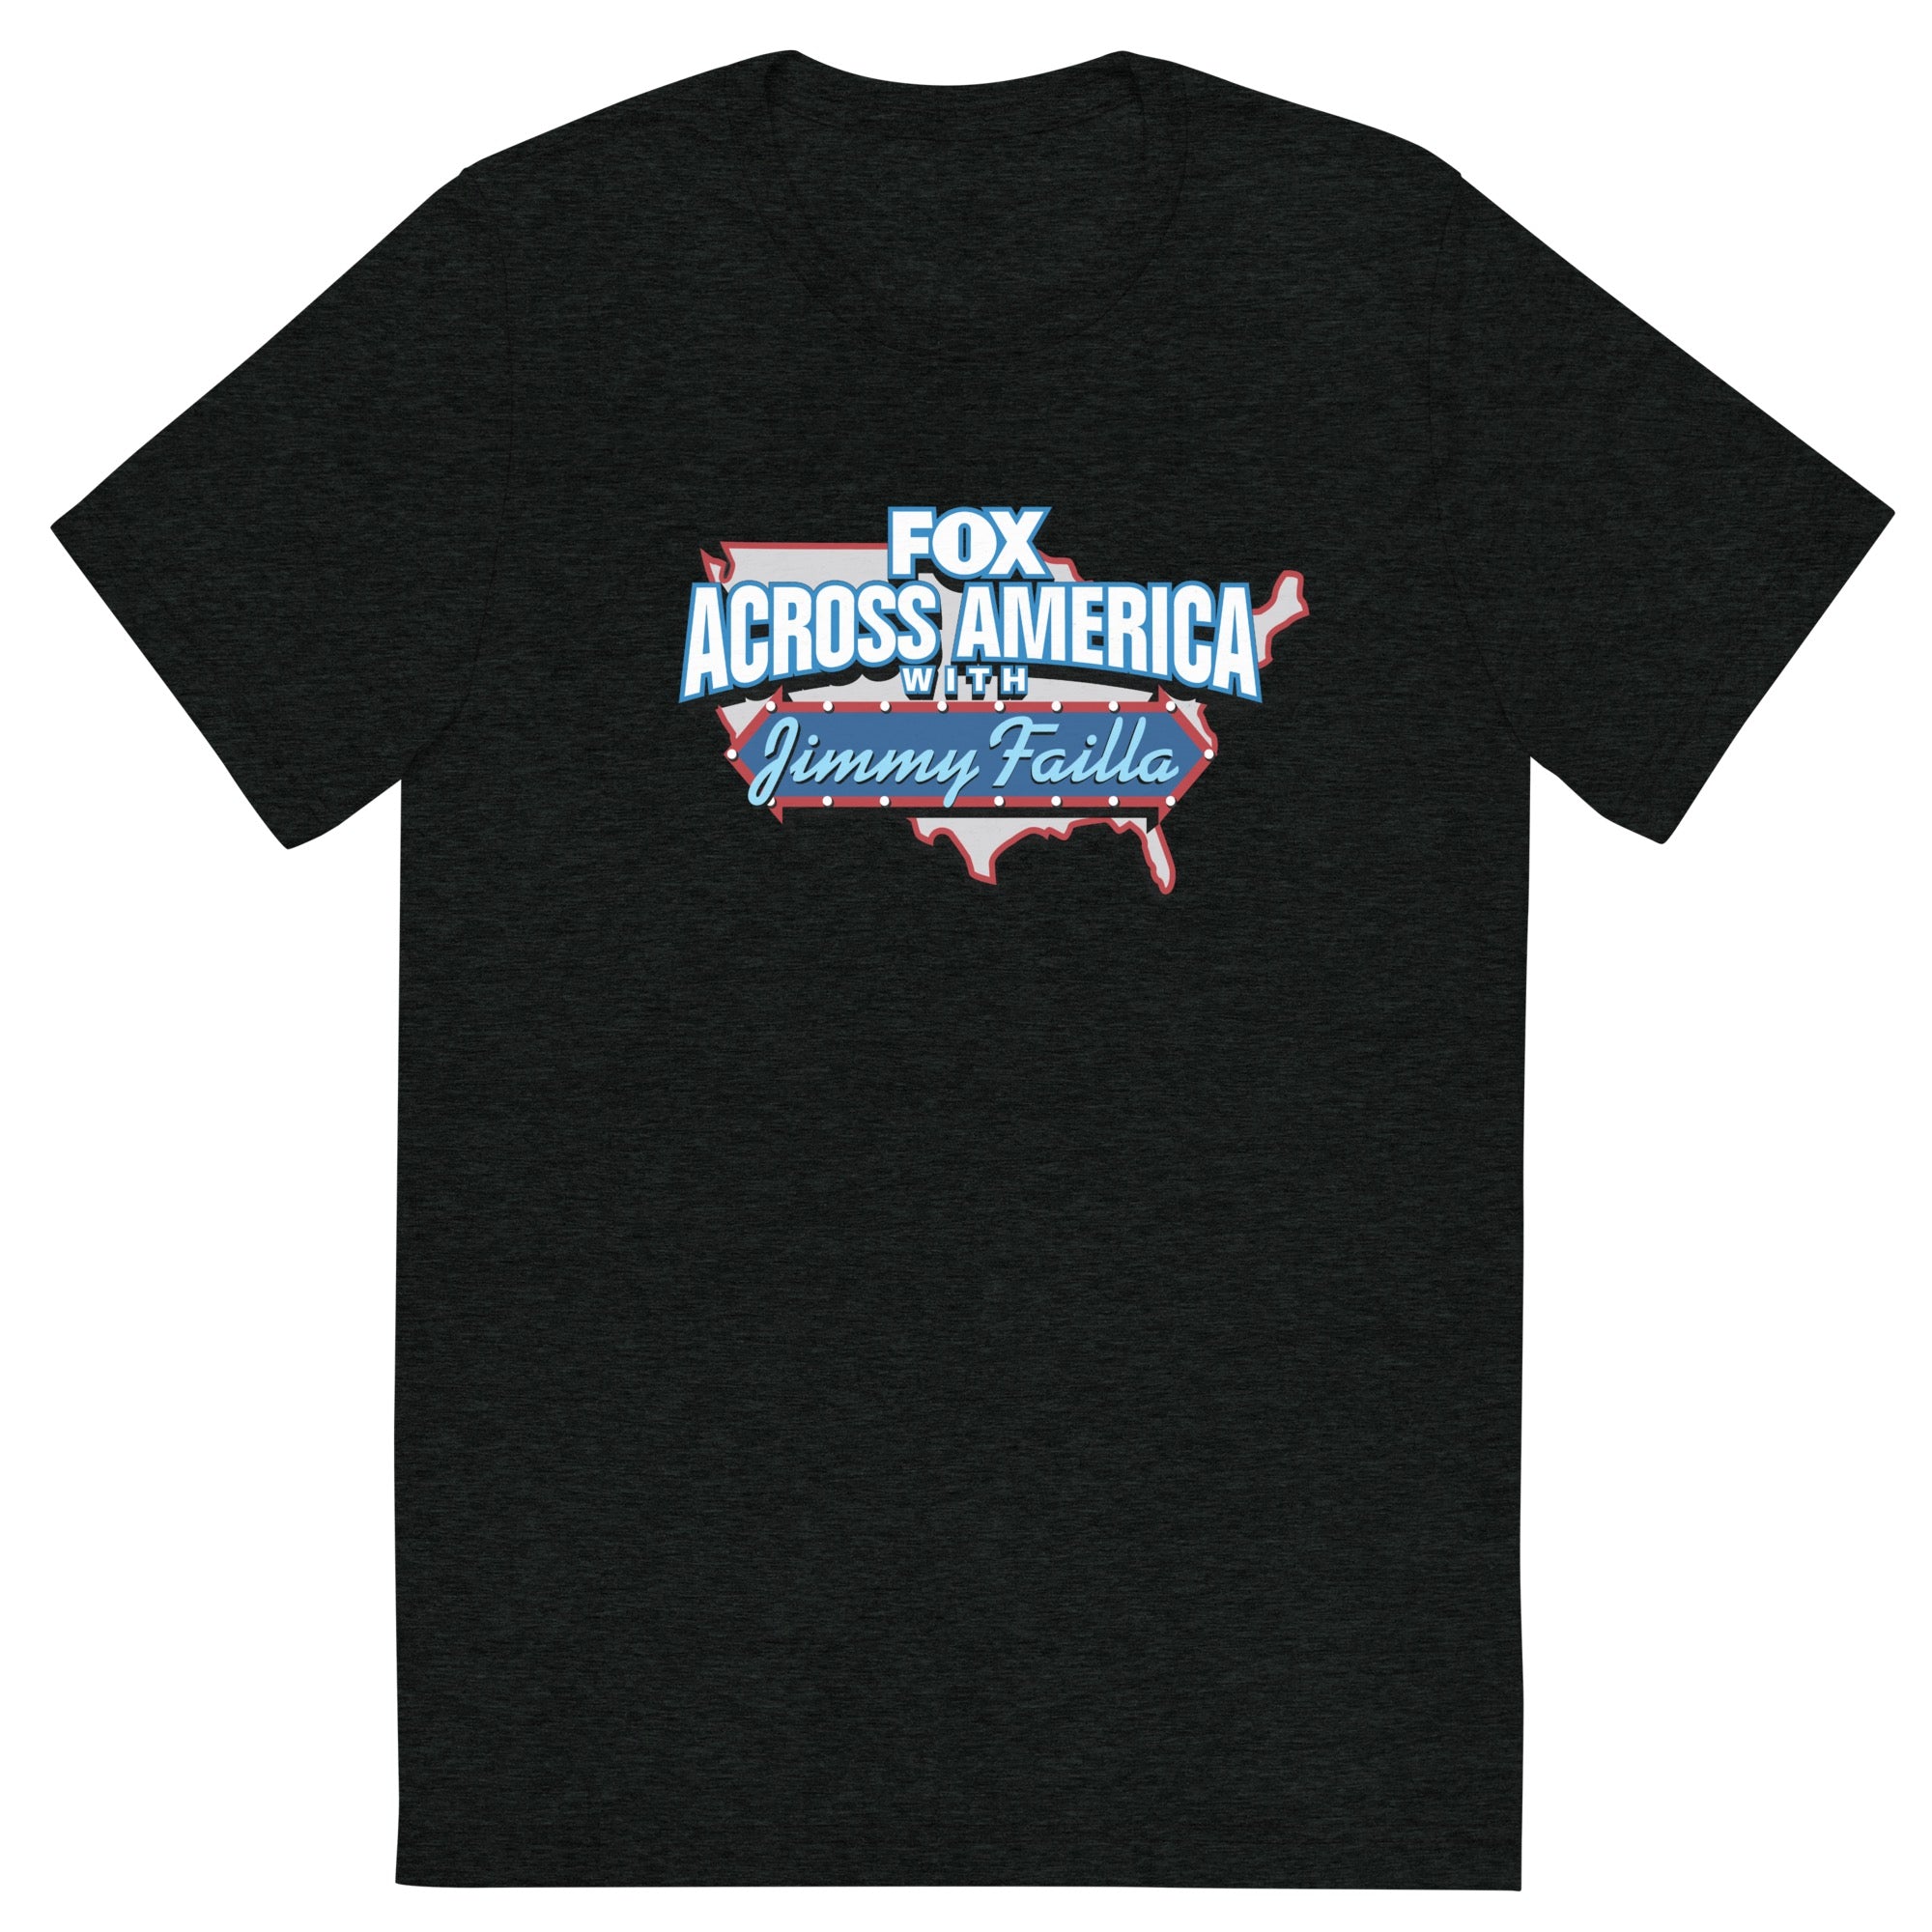 Image of Fox Across America with Jimmy Failla T-Shirt